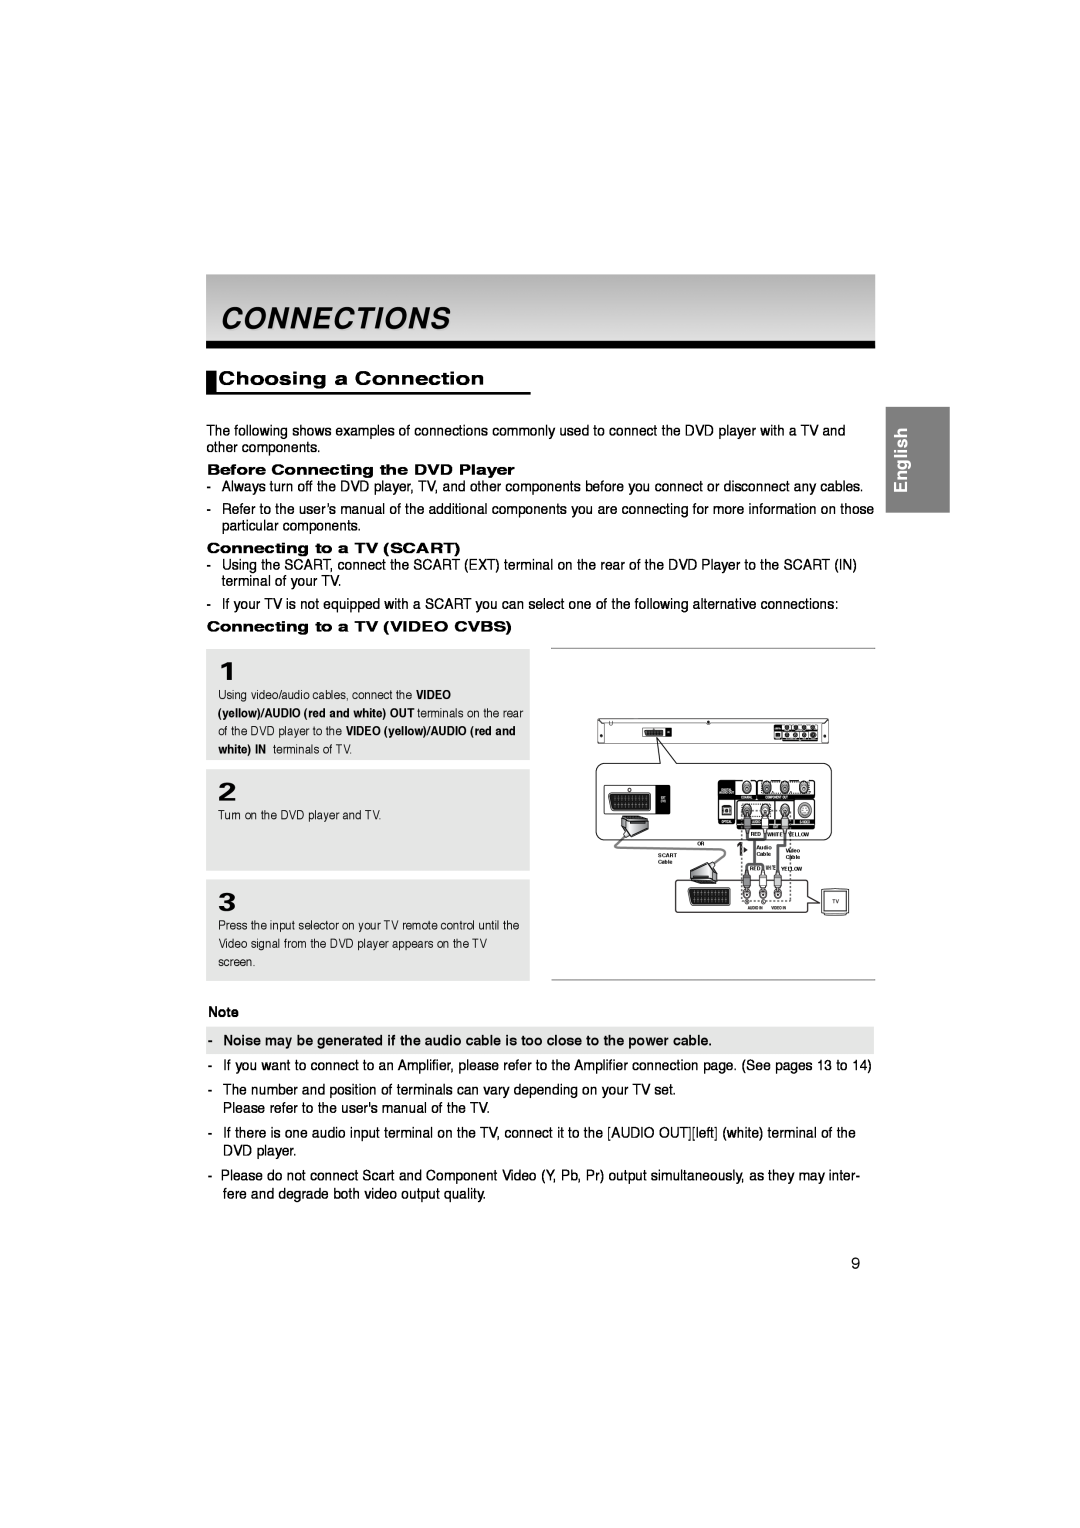 Samsung DVD-P260K/AFR manual Connections, Choosing a Connection, Before Connecting the DVD Player, Connecting to a TV SCART 